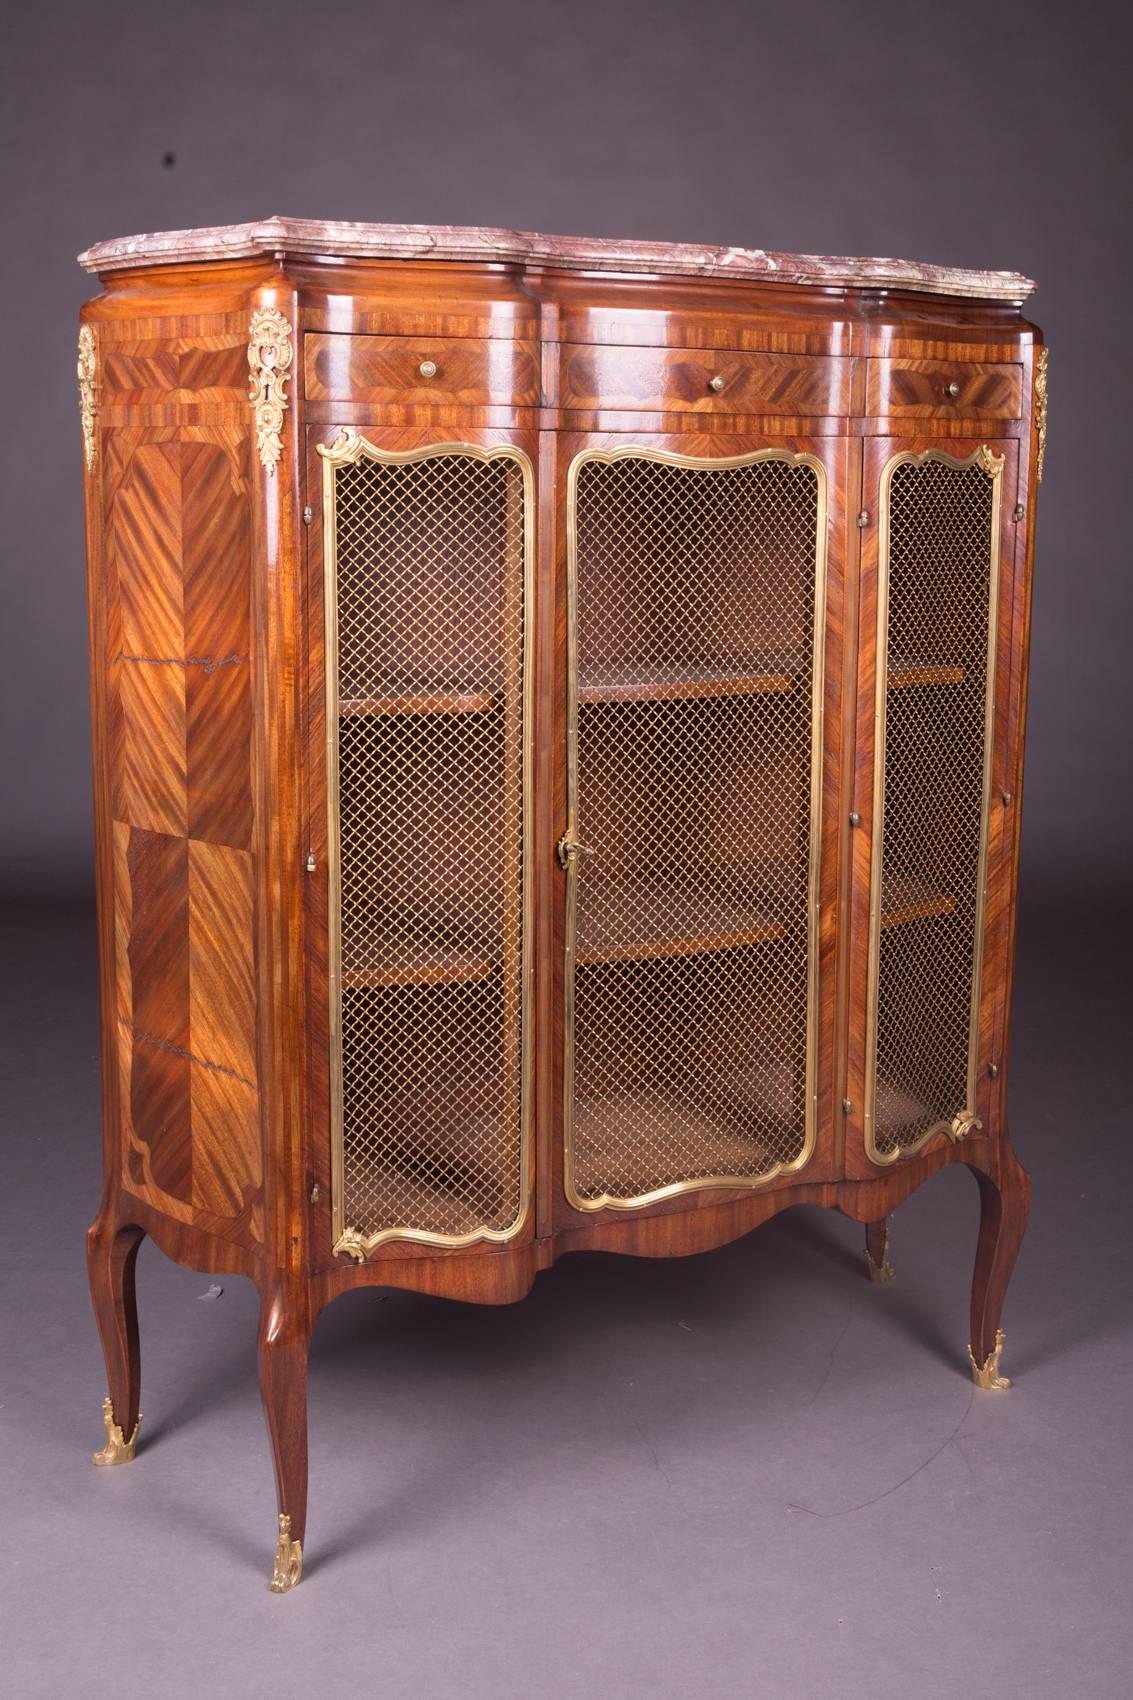 Royal and rosewood. Three-body, curved body on short curved legs. Reddish brown, white veined marble slab. Finely chased, fire-gilt bronze.

(O-221).